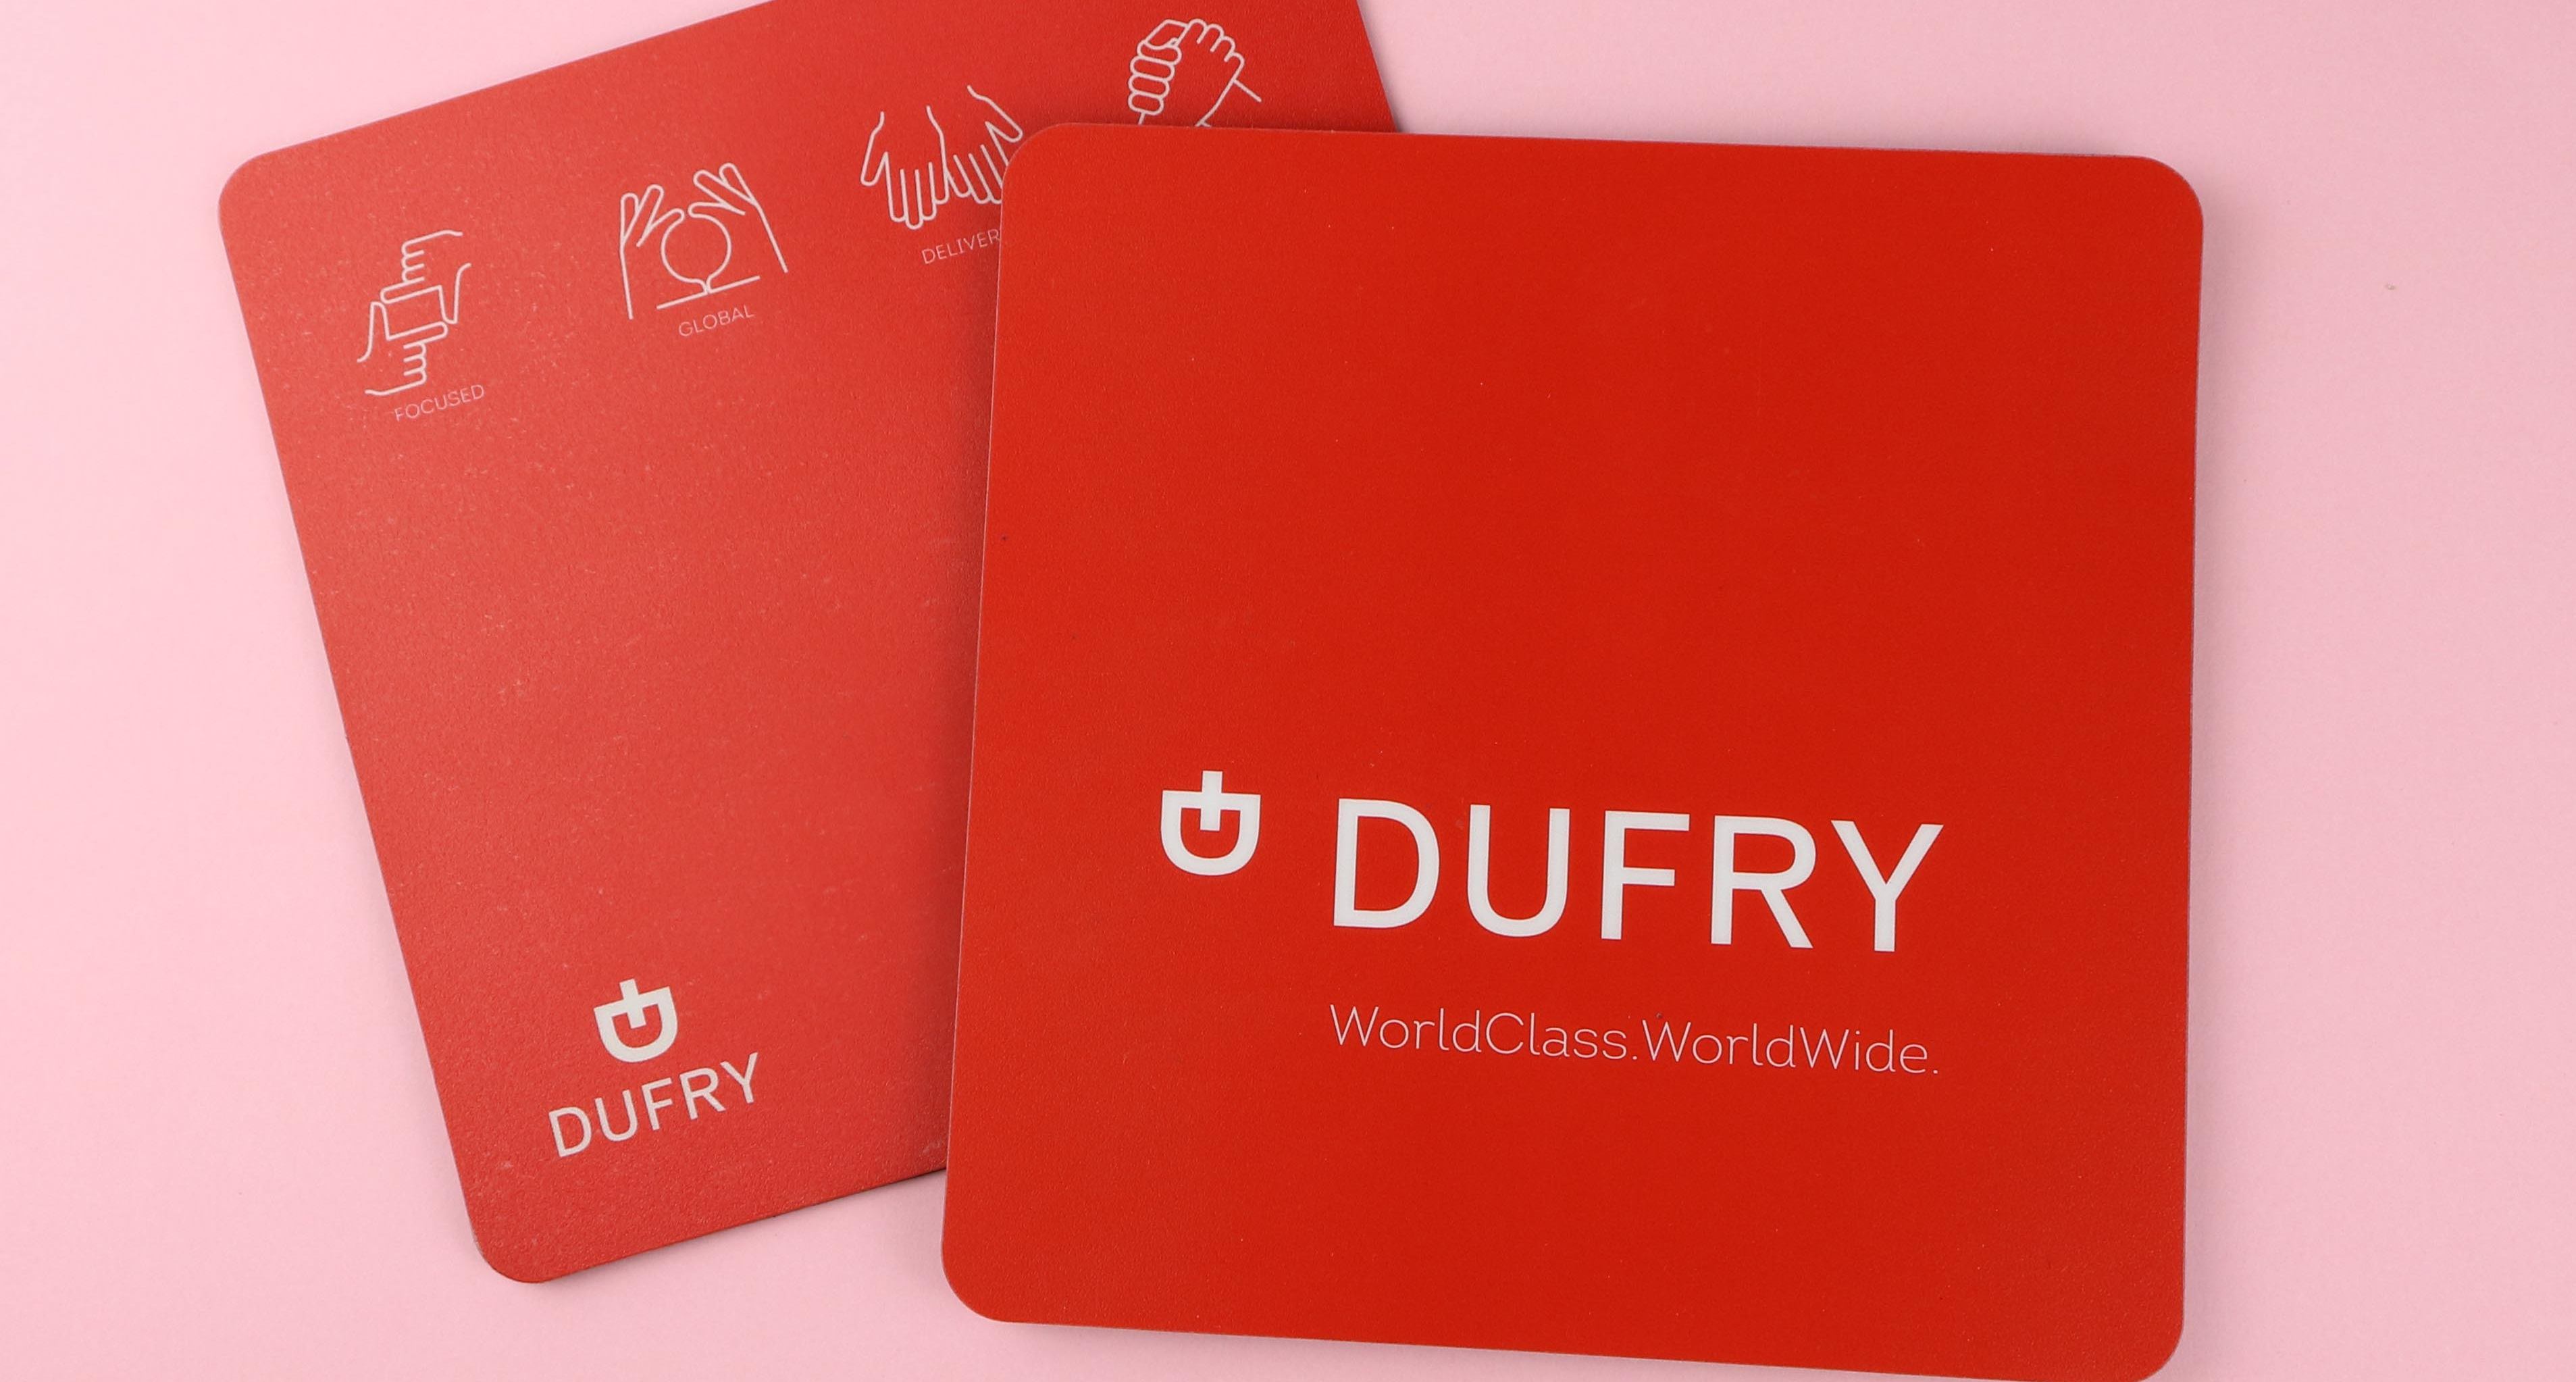 IGP(Innovative Gift & Premium)|Dufry